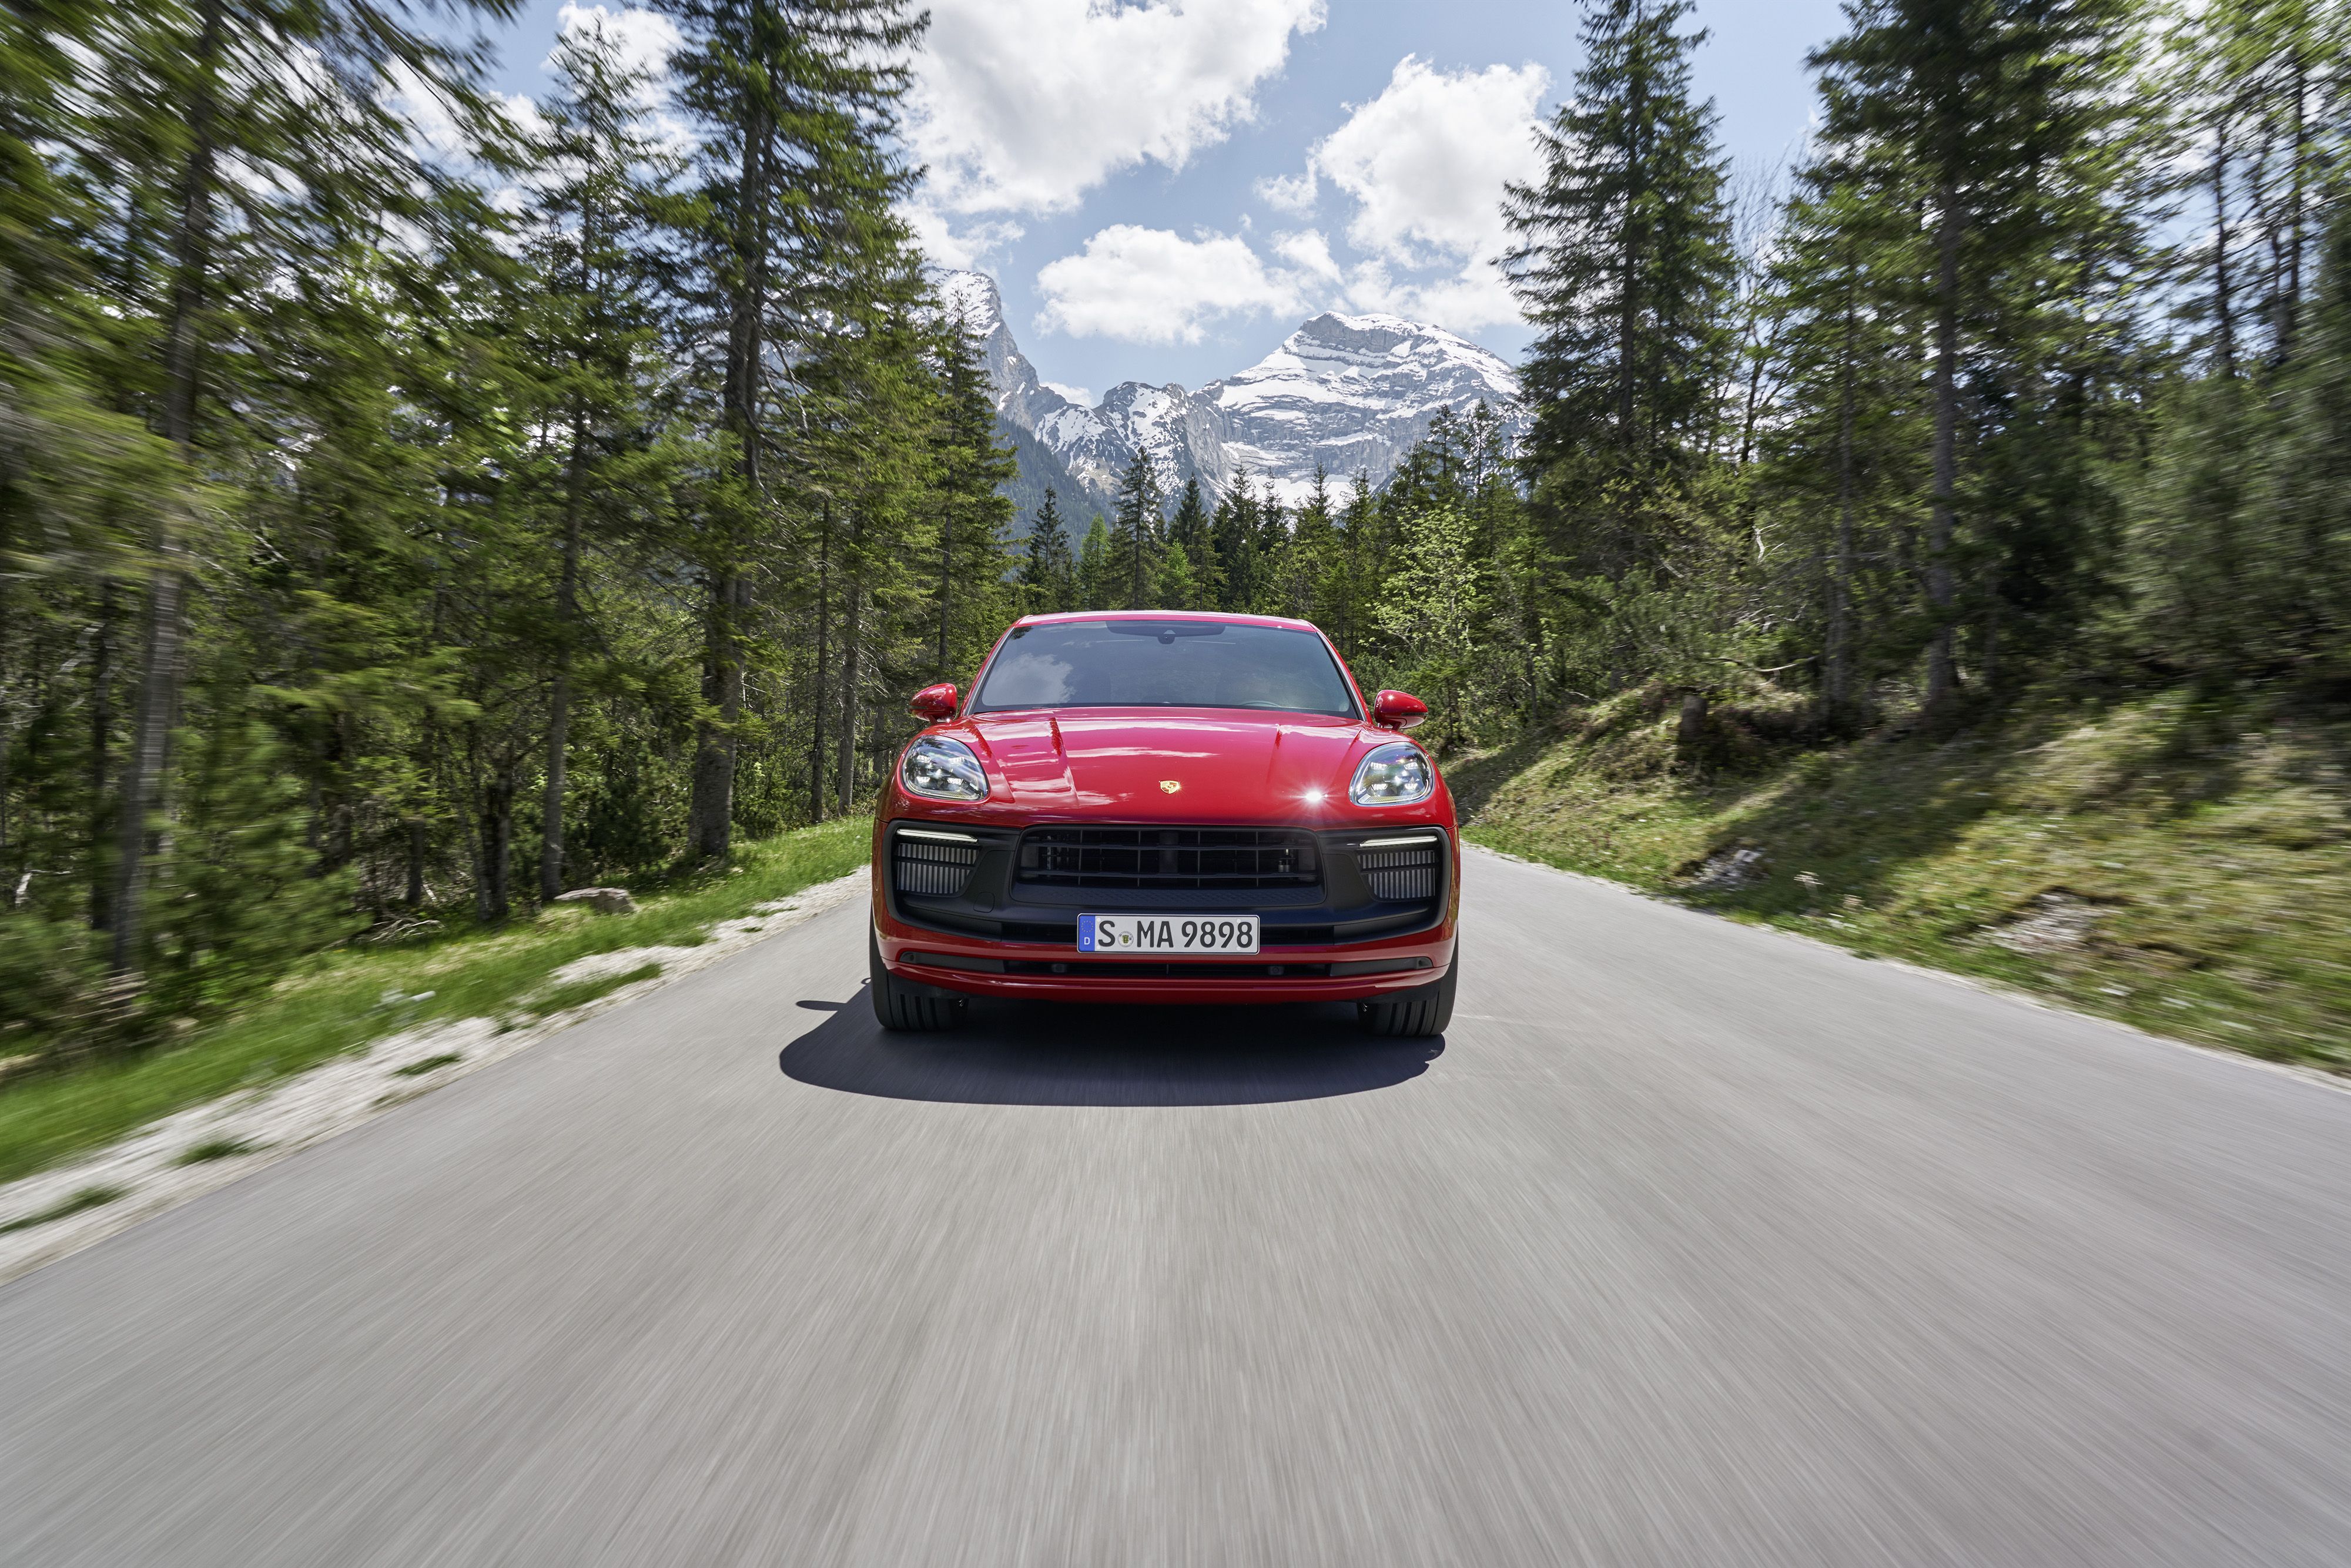 Porsche Says Its 2022 Macan Is More Capable and Better Looking Than Ever